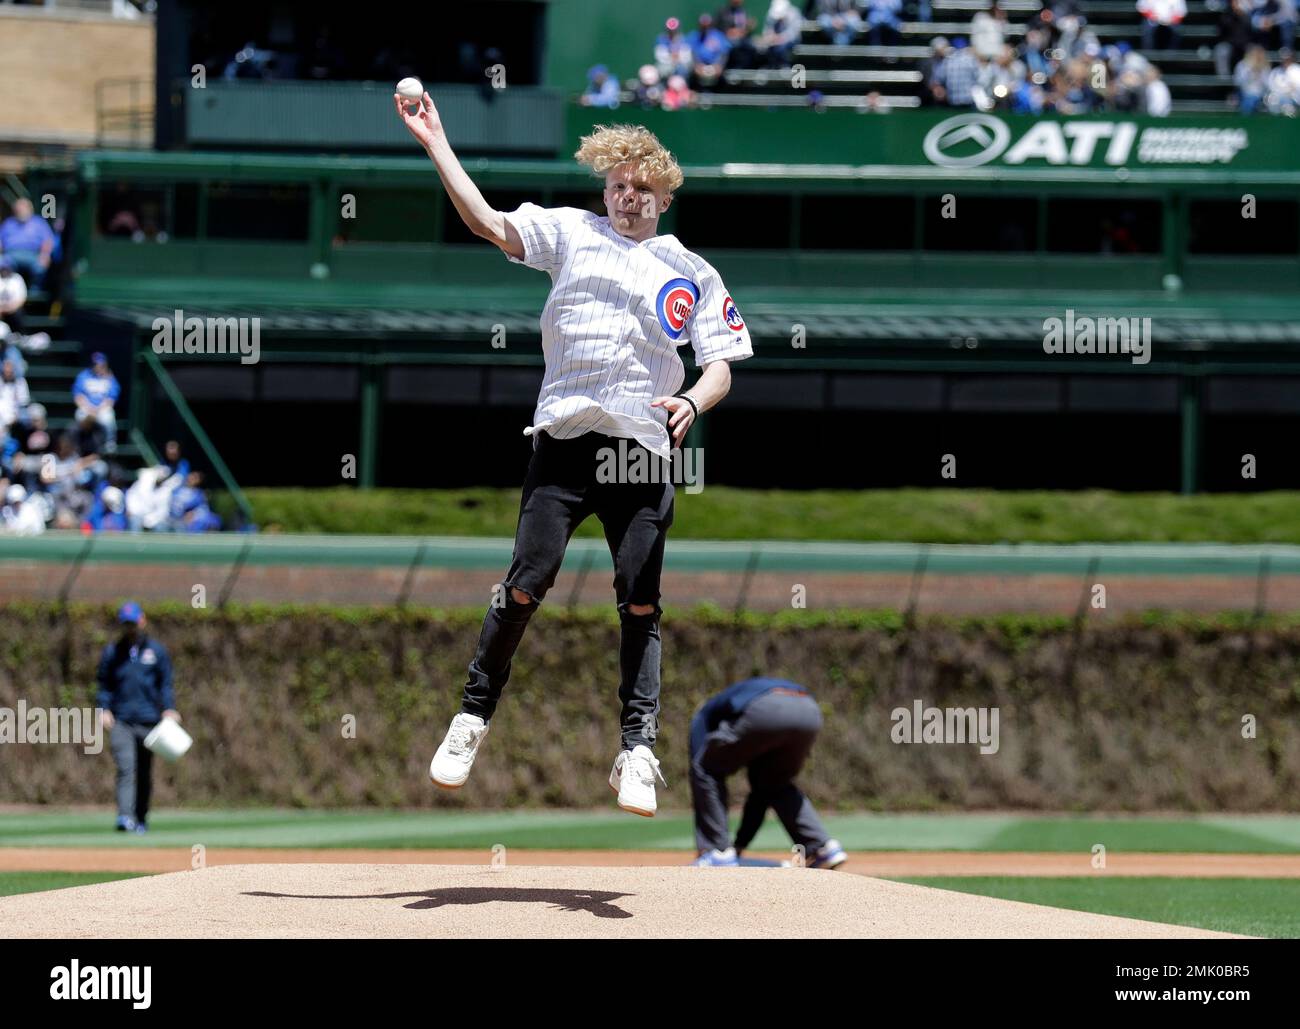 Youtube creator Tristan Jass throws out a ceremonial first pitch before a baseball game between the Milwaukee Brewers and the Chicago Cubs, Friday, May 10, 2019, in Chicago